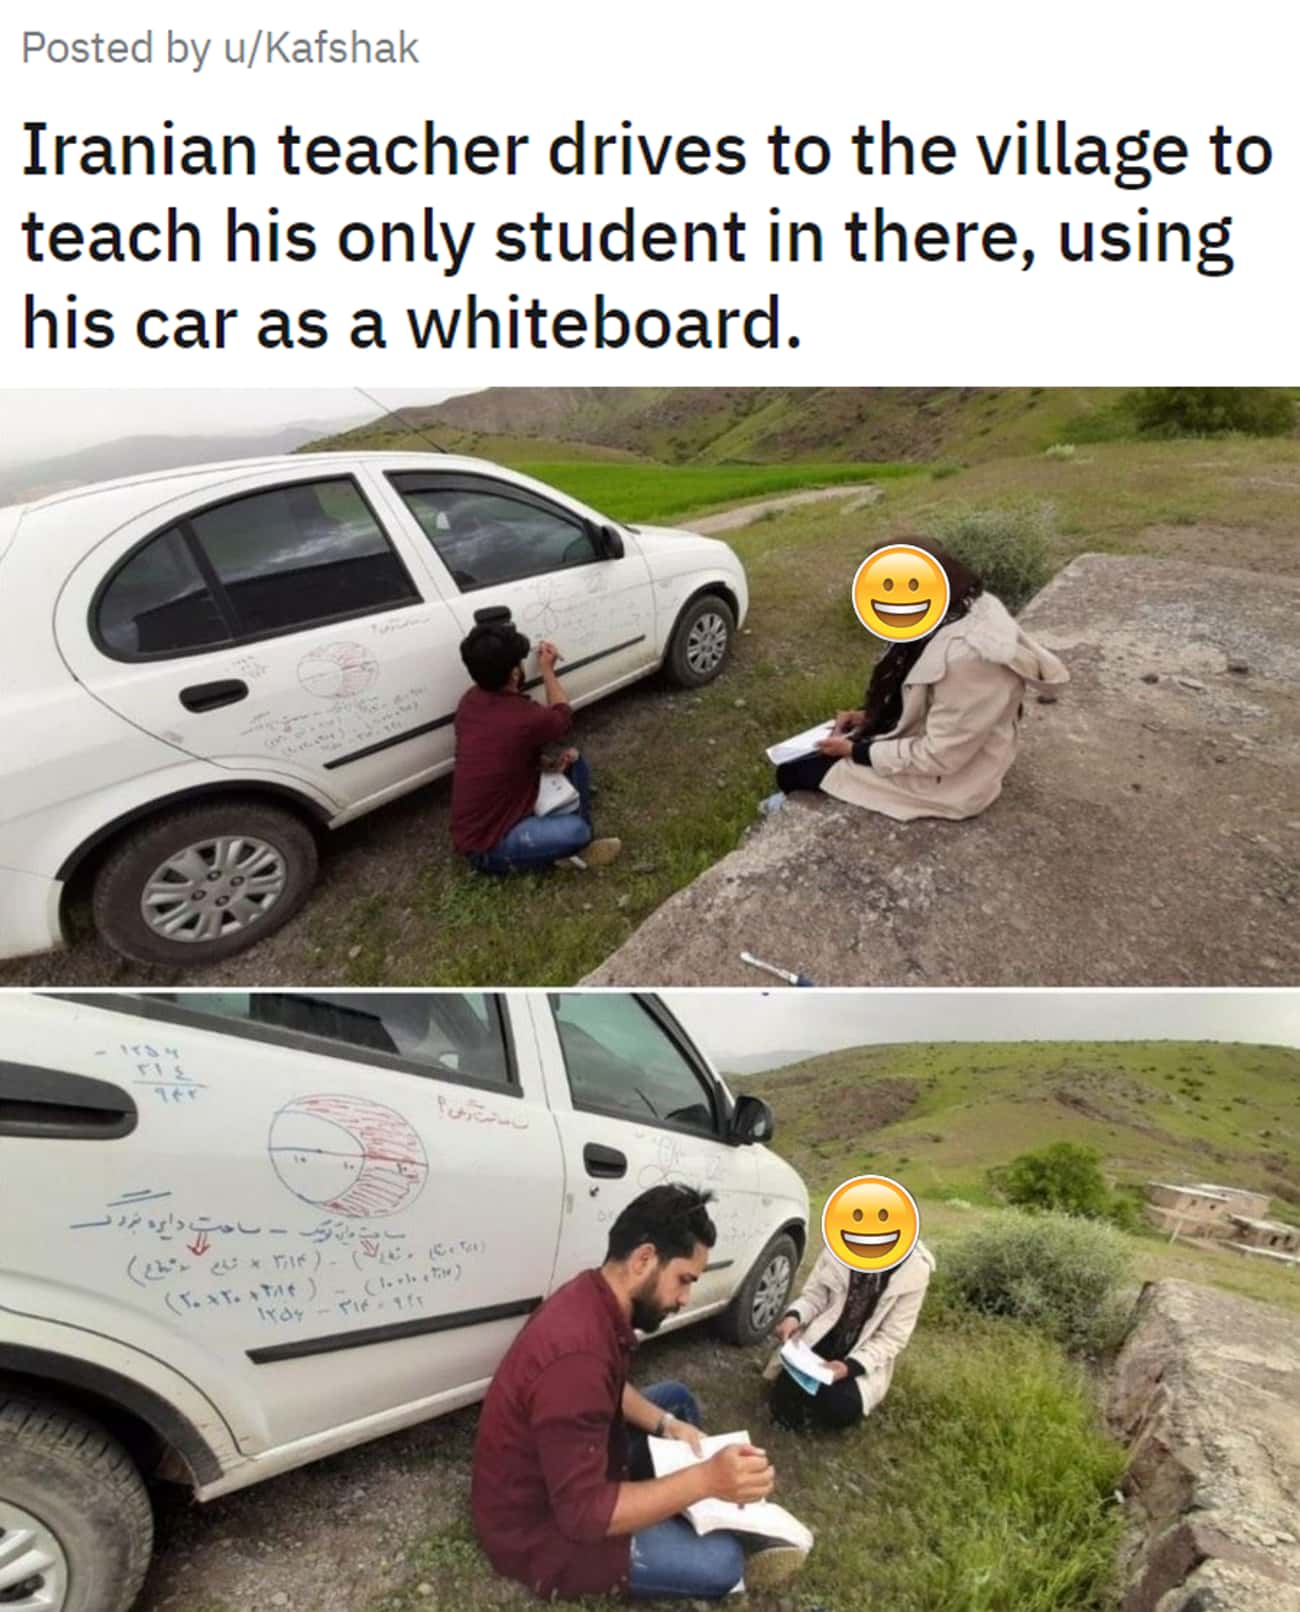 Teaching Any Way You Can